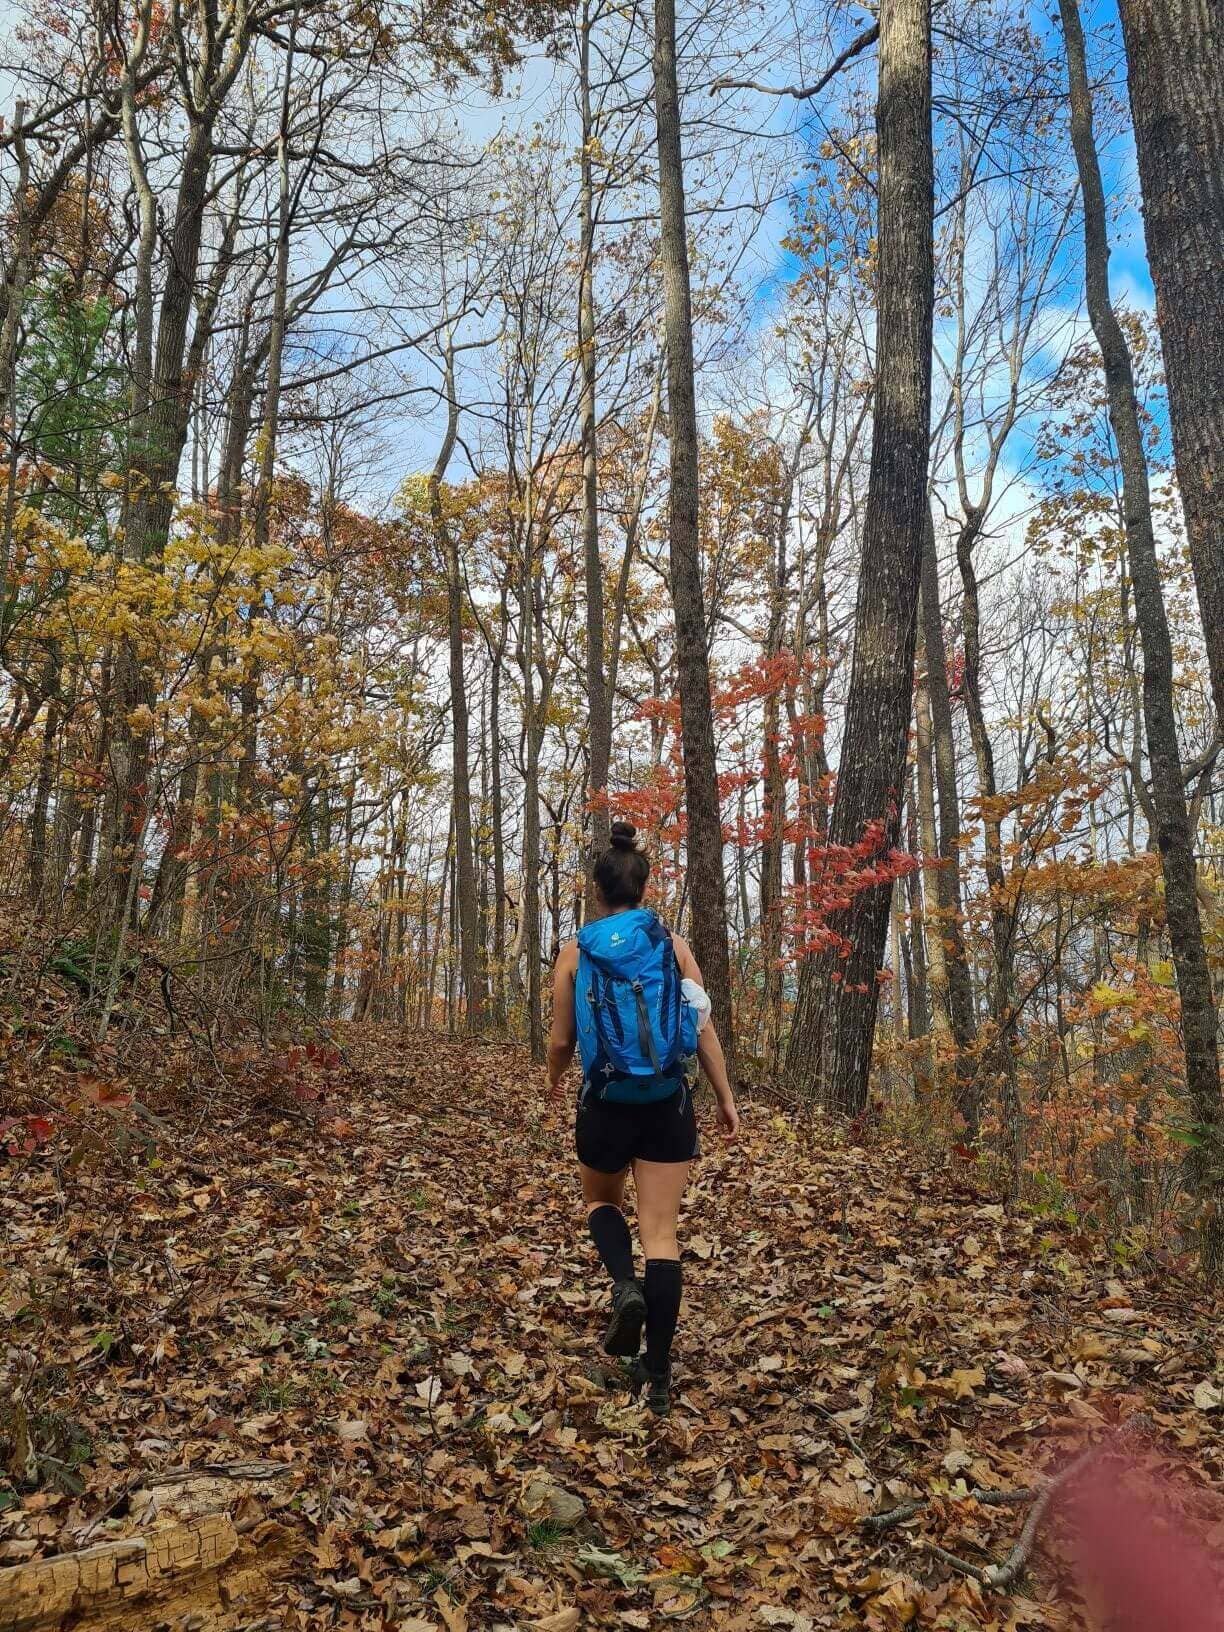 walking without hiking blisters at unicoi gap in the fall